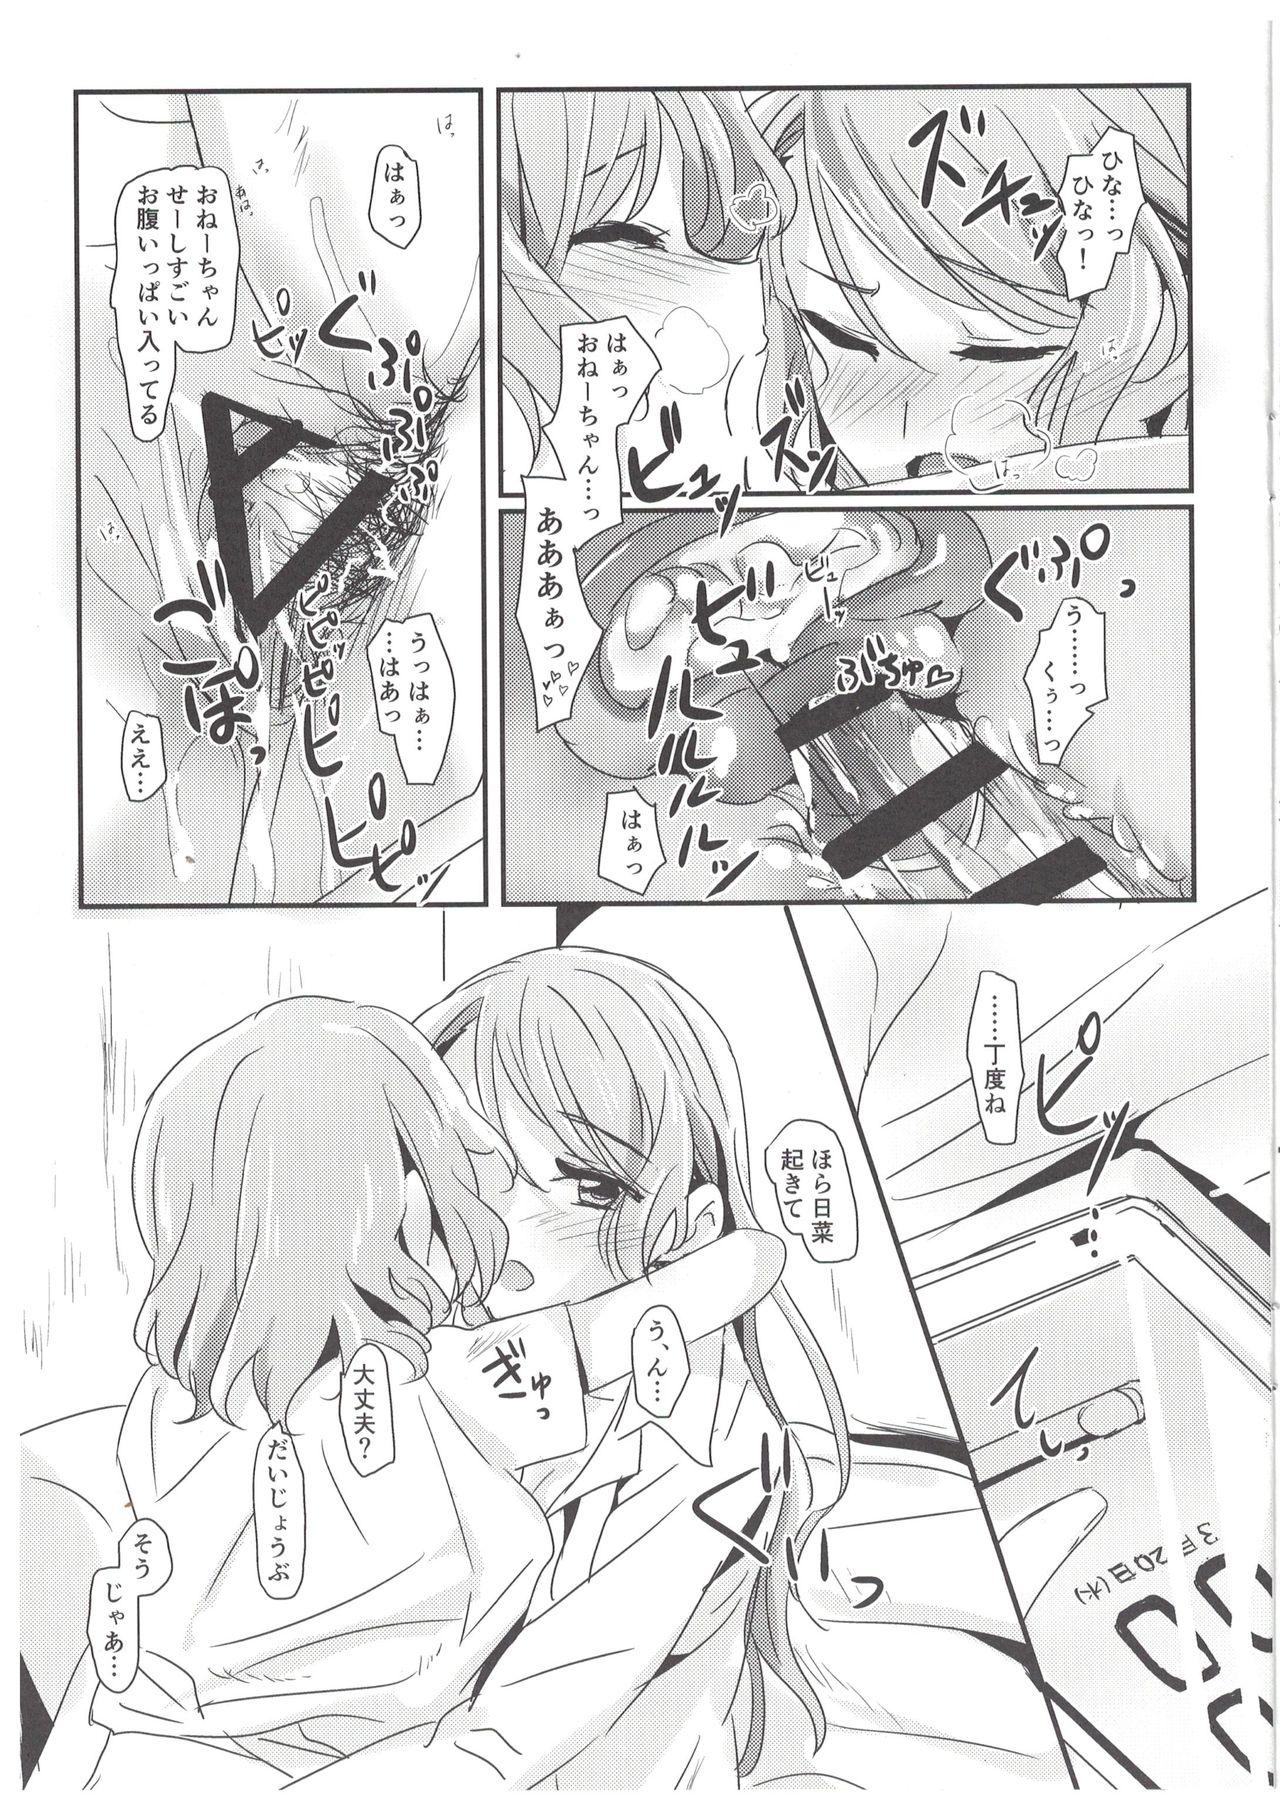 Ass To Mouth AM:0 - Bang dream Aunt - Page 8